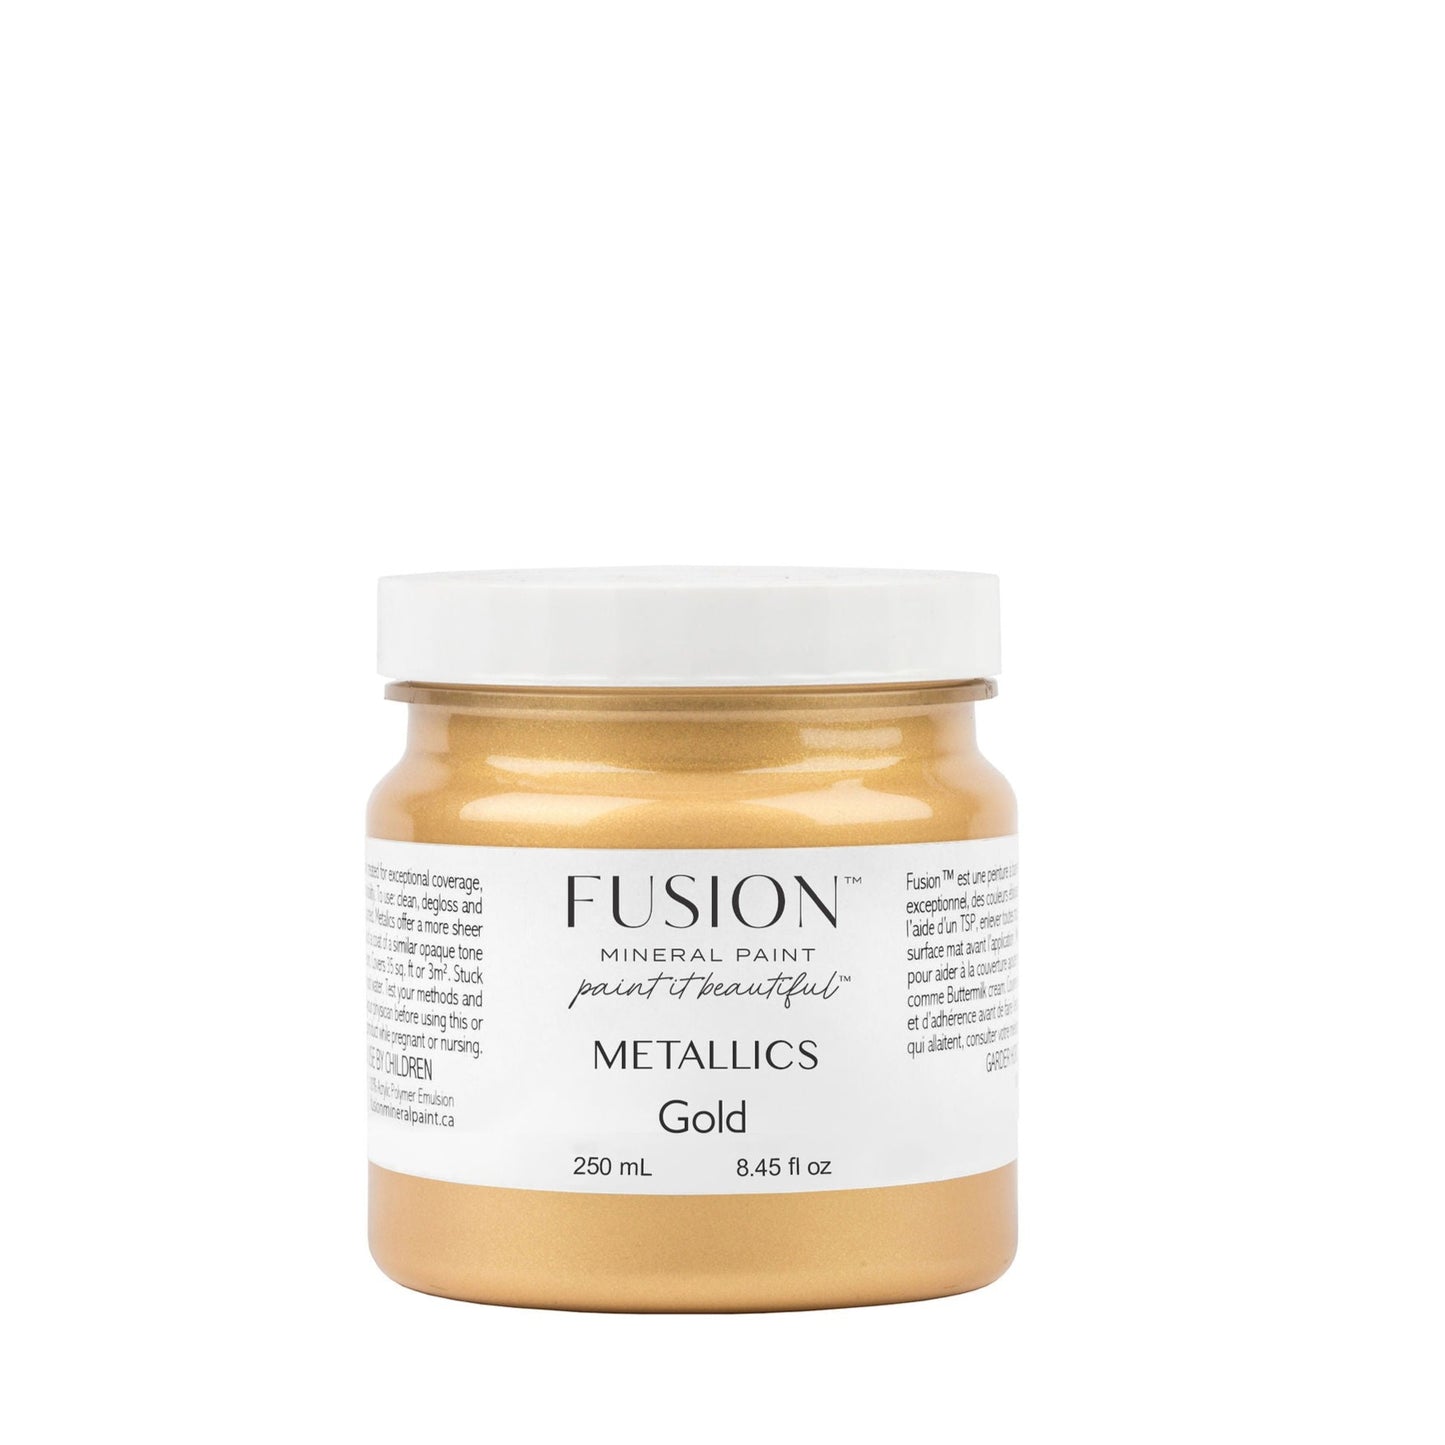 Acrylfarbe | Fusion Mineral Paint - Metallic - Pale Gold